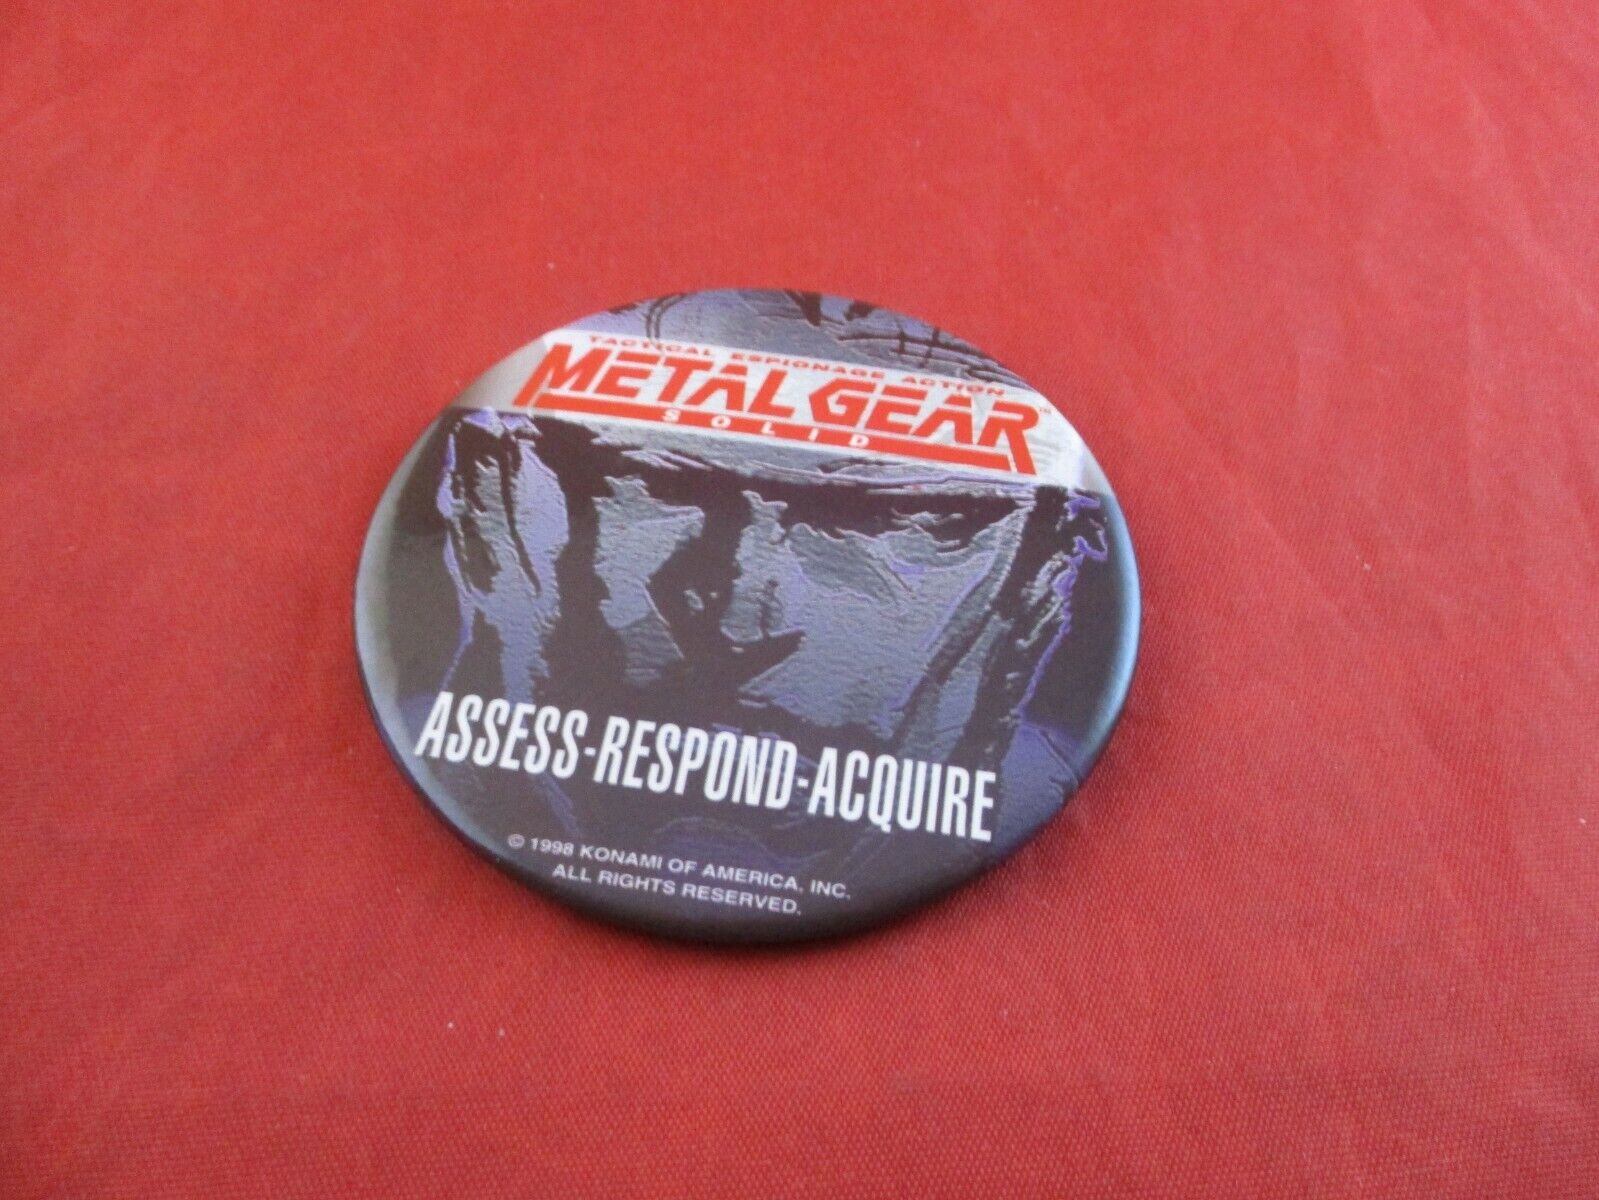 Metal Gear Solid Playstation 1 PS1 Promotional Button Pin Promo Pinback